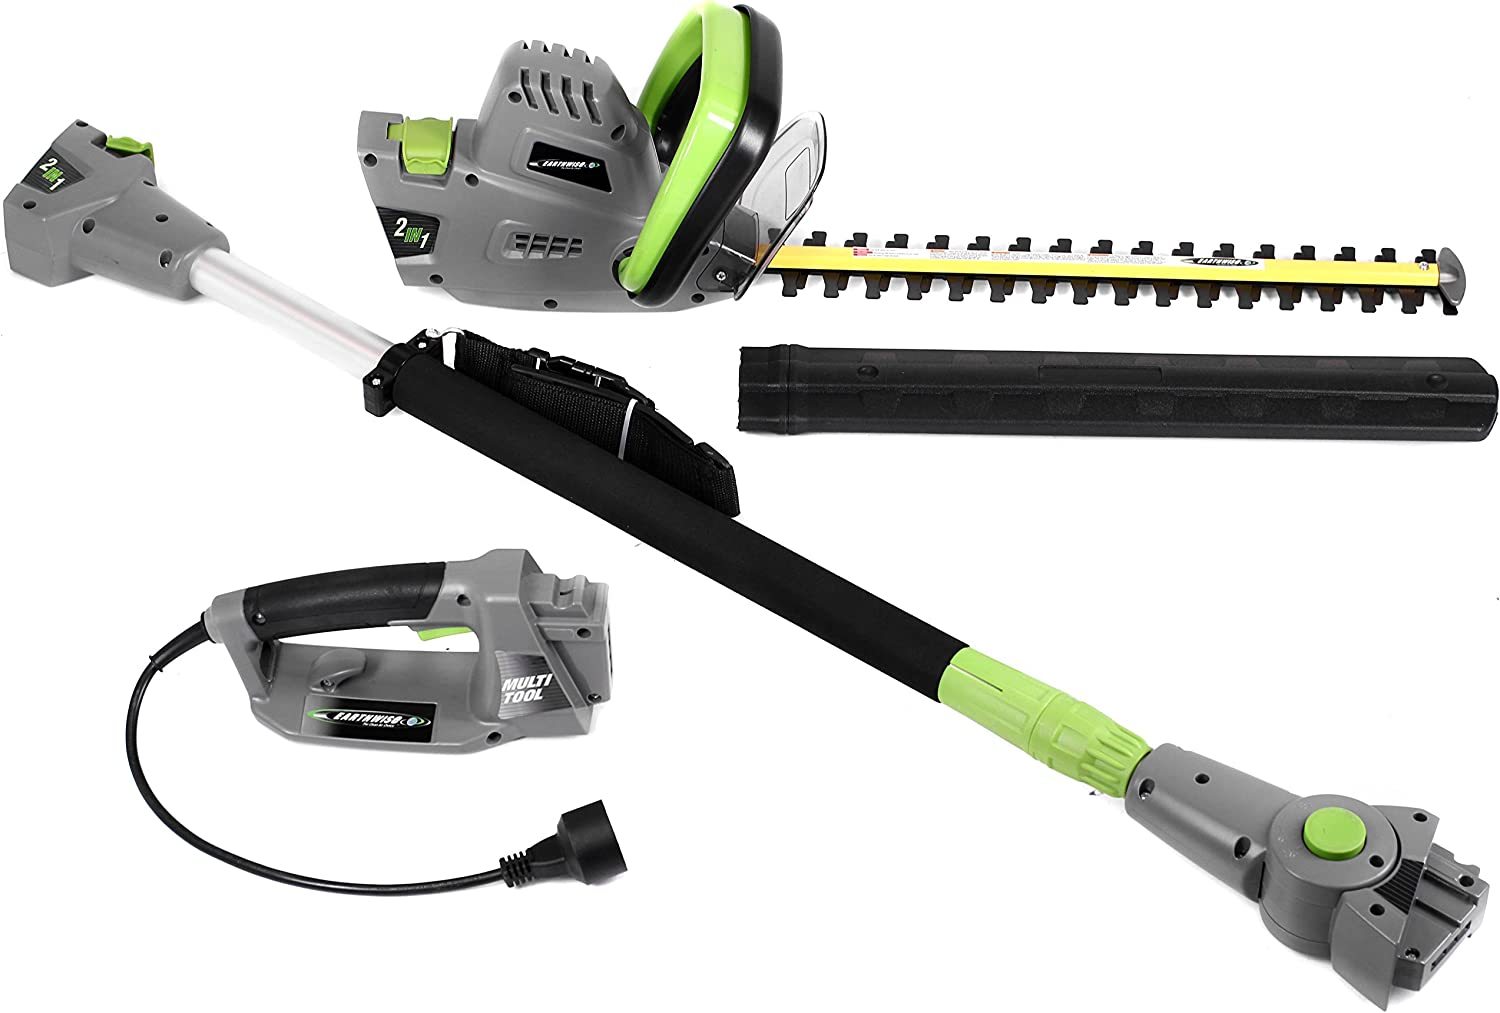 Earthwise Cvph43018 Corded 4 Point 5 Amp 2-In-1 Pole Hedge Trimmer, Grey - $111.92